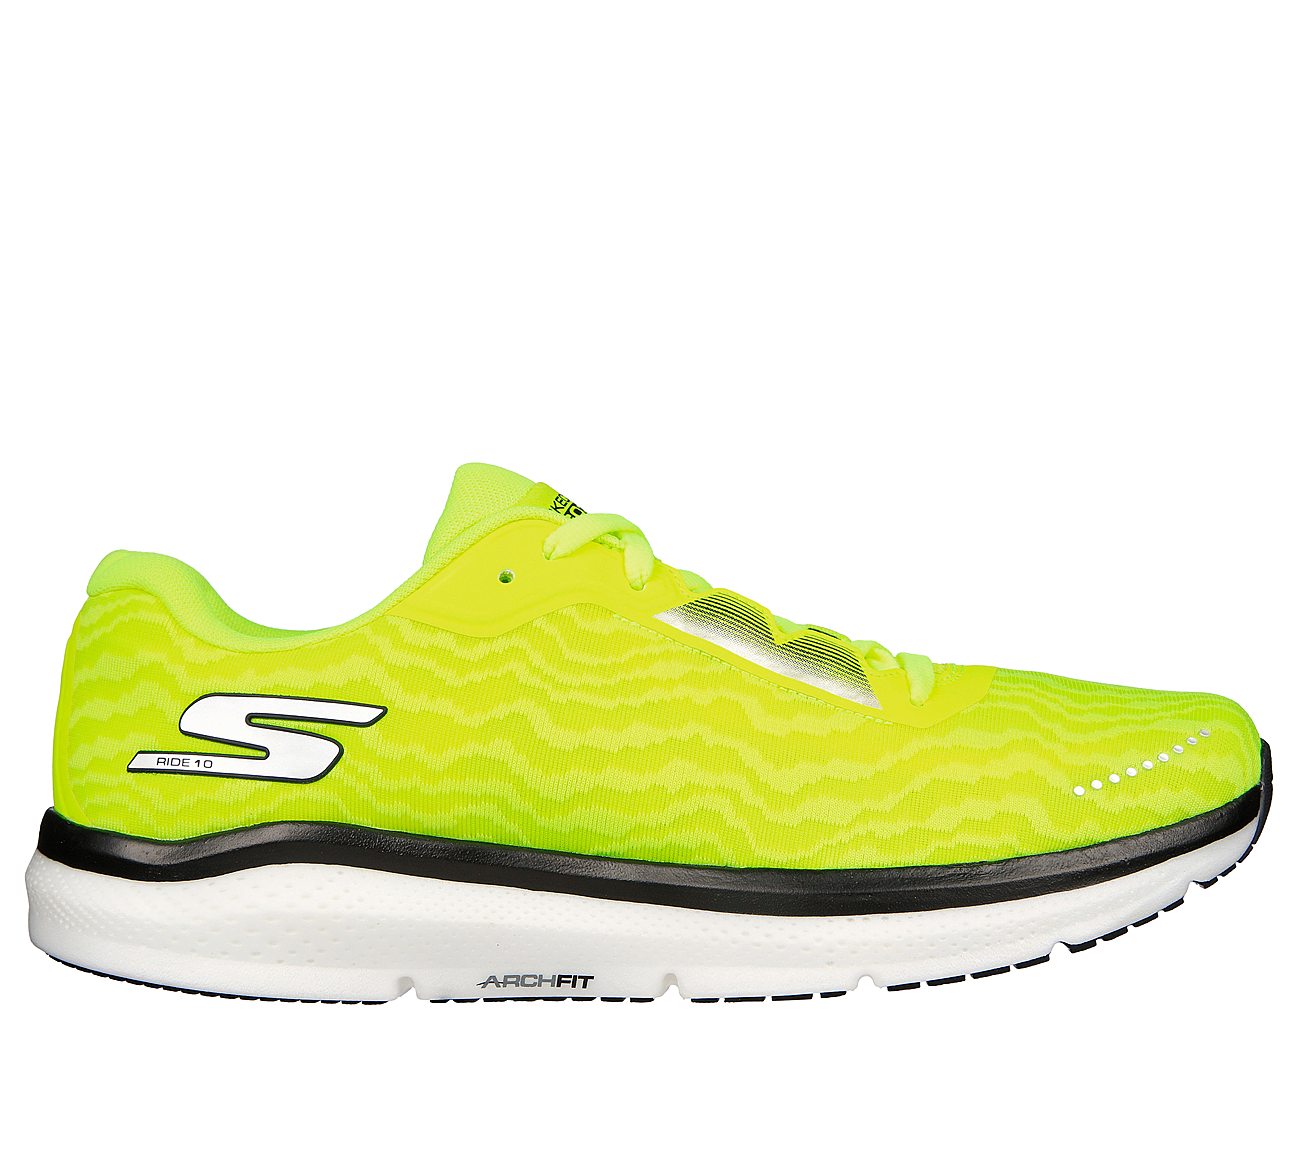 GO RUN RIDE 10, YELLOW/WHITE Footwear Lateral View